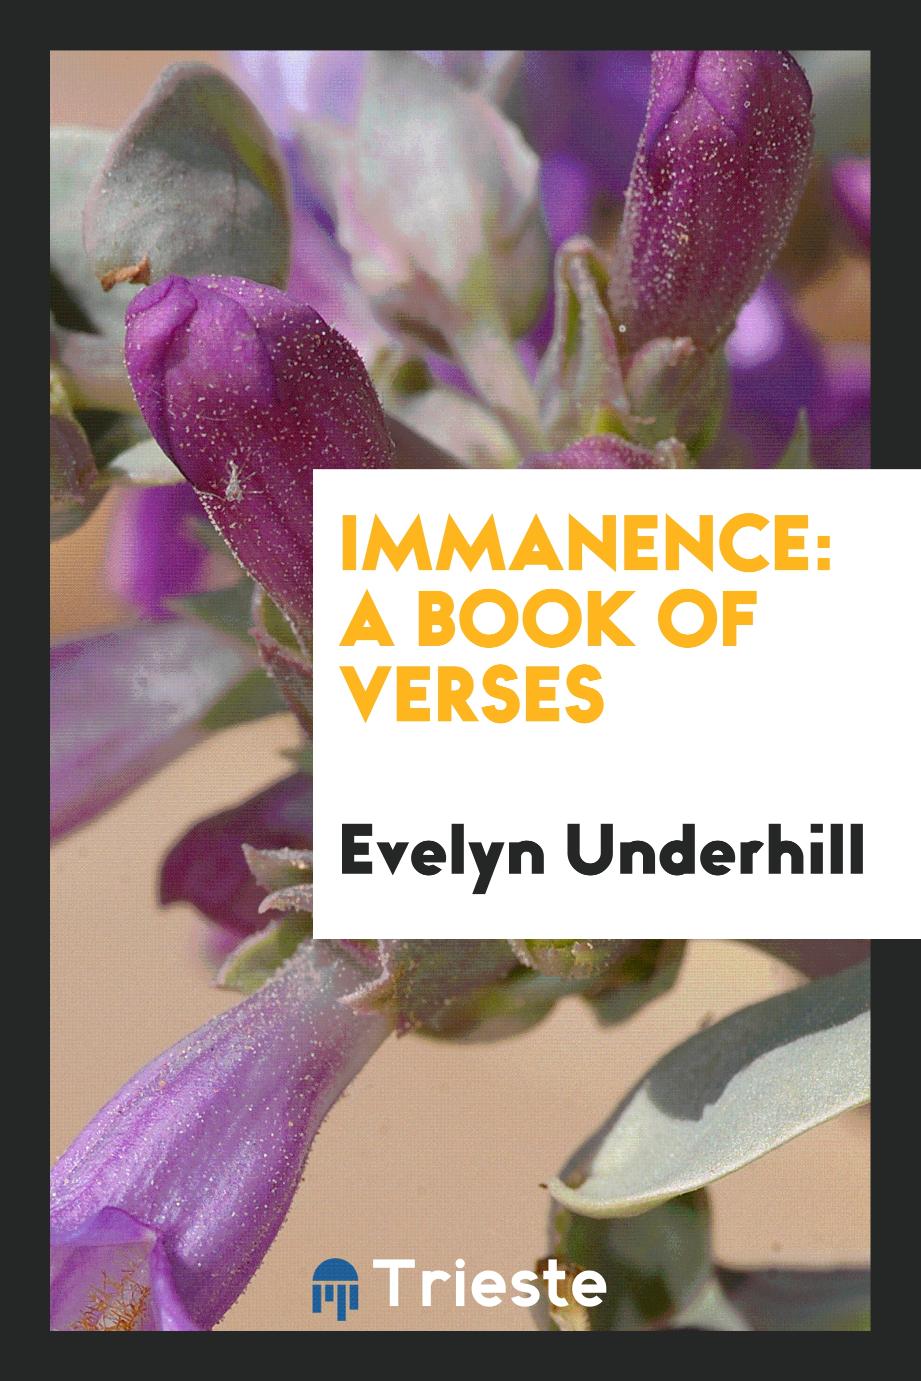 Immanence: a book of verses